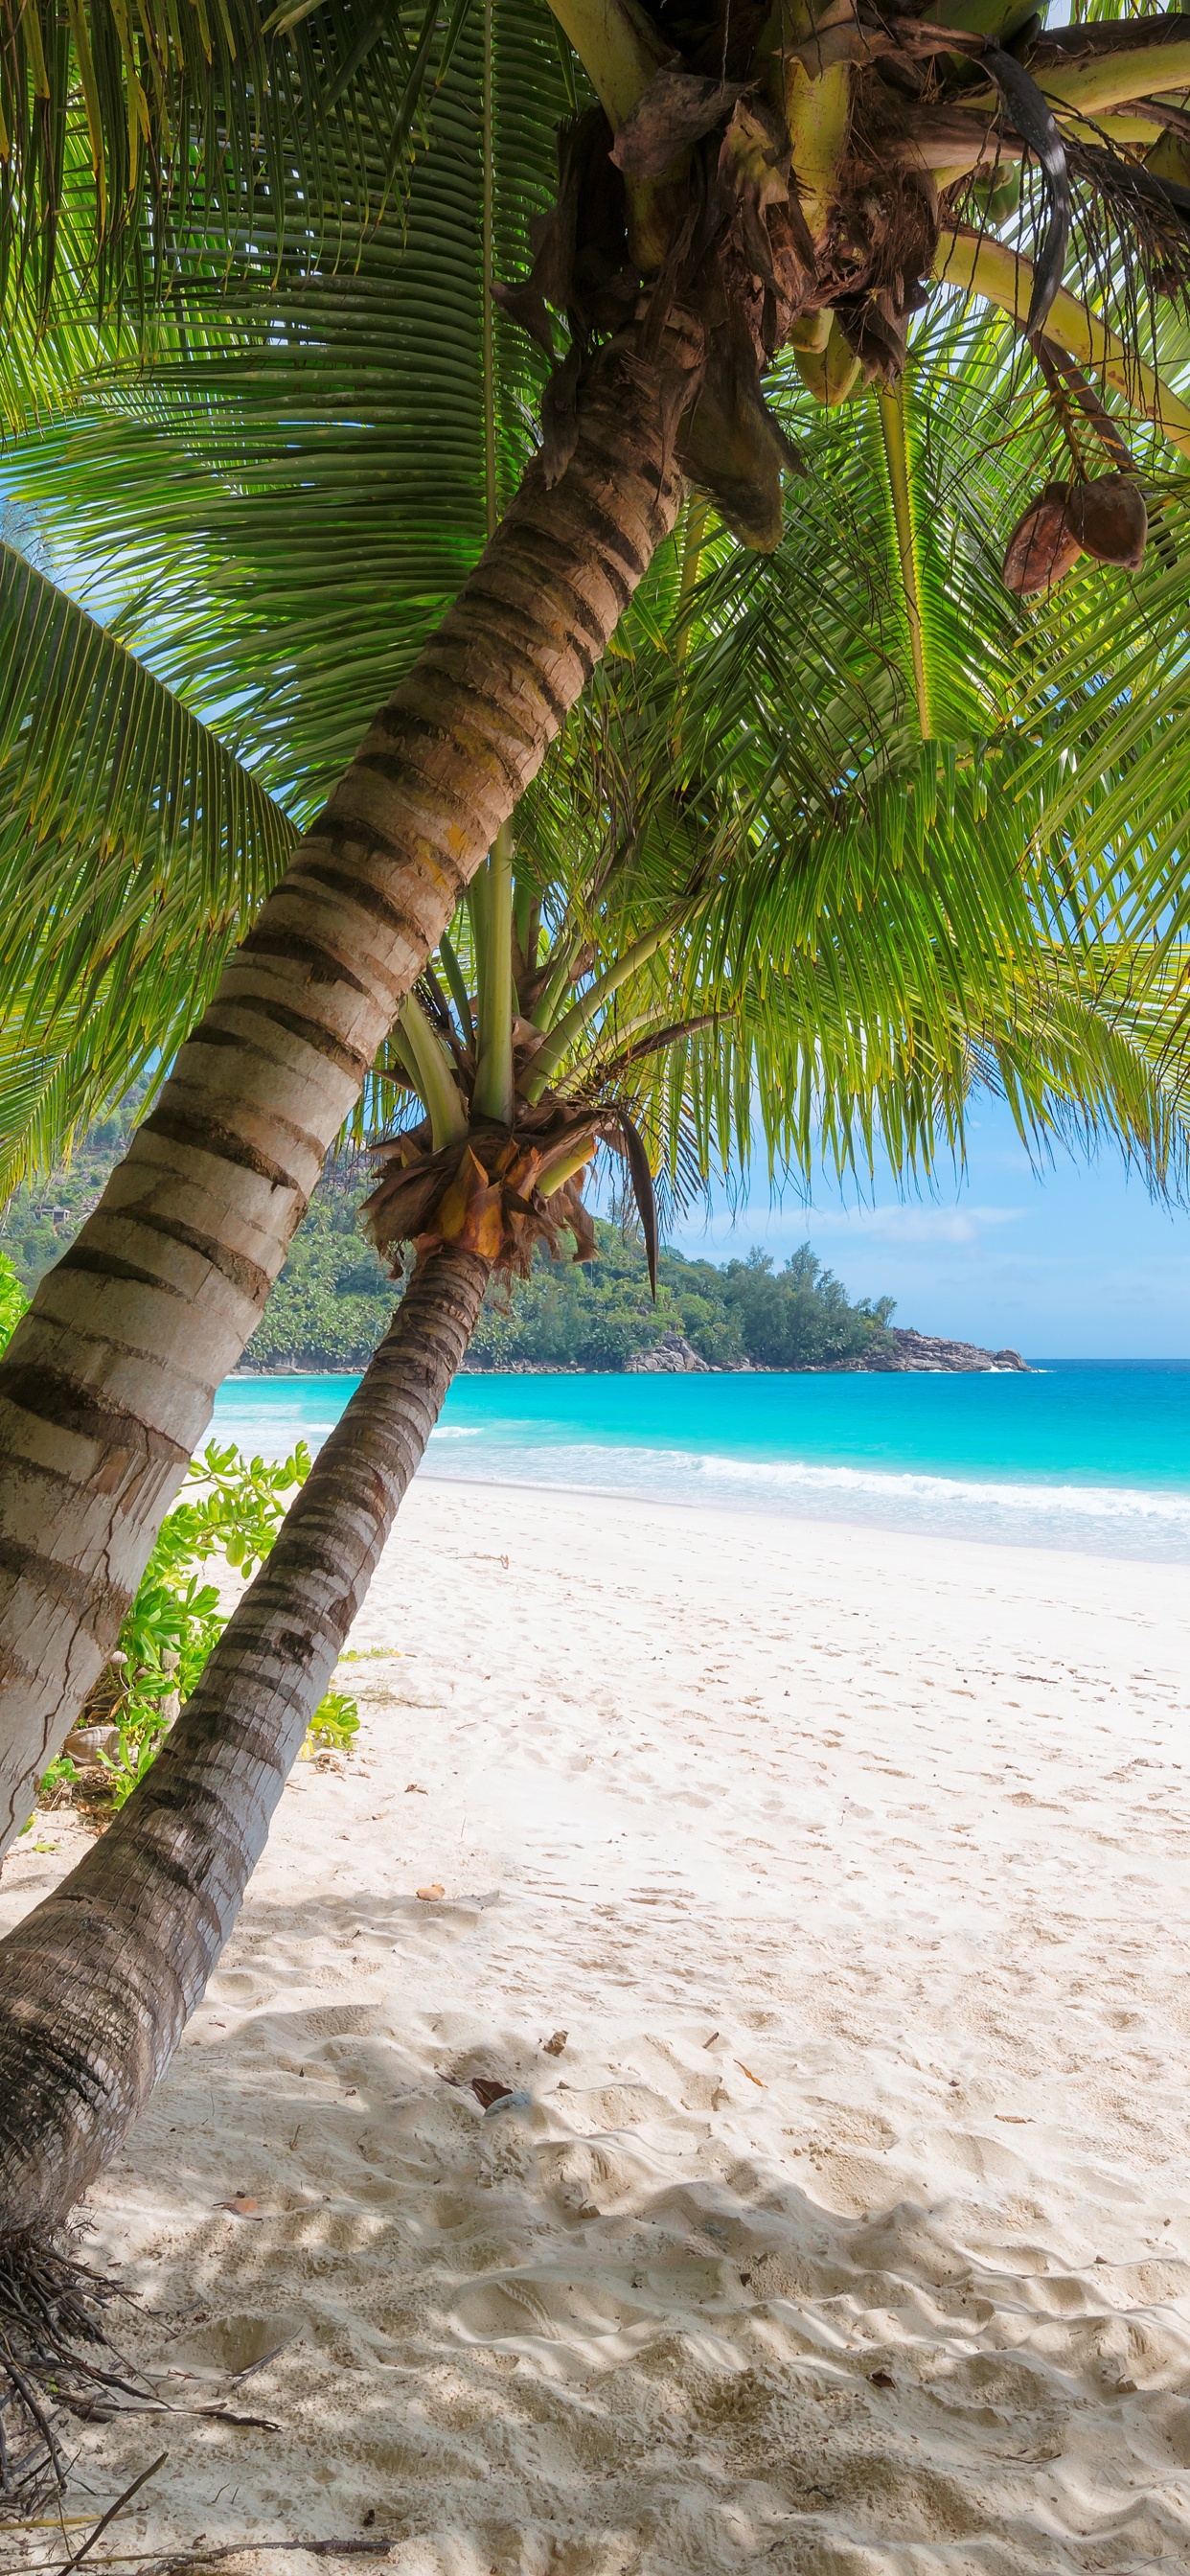 Coconut Tree on White Sand Beach During Daytime. Wallpaper in 1242x2688 Resolution